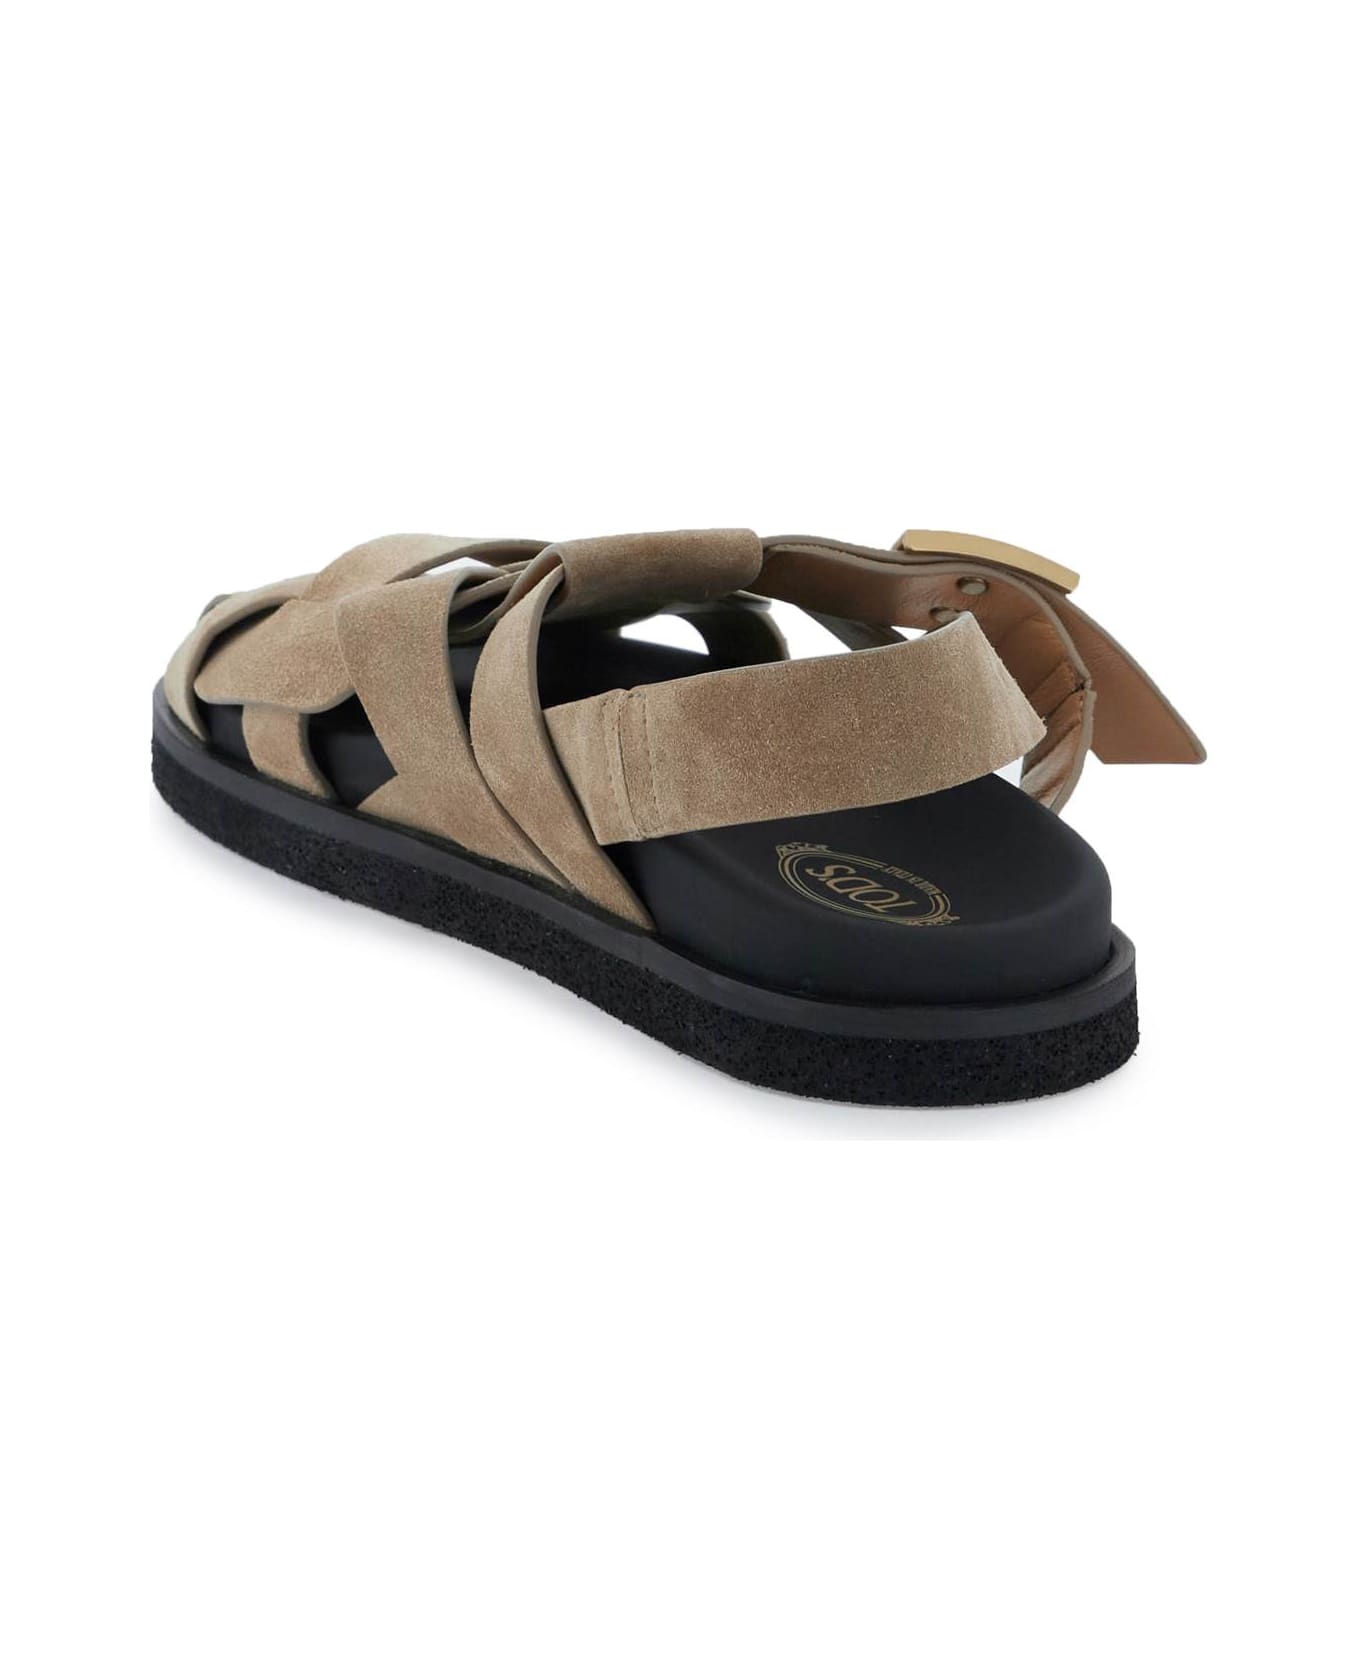 Tod's T Timeless Sandals - TABACCO CHIARO (Beige)